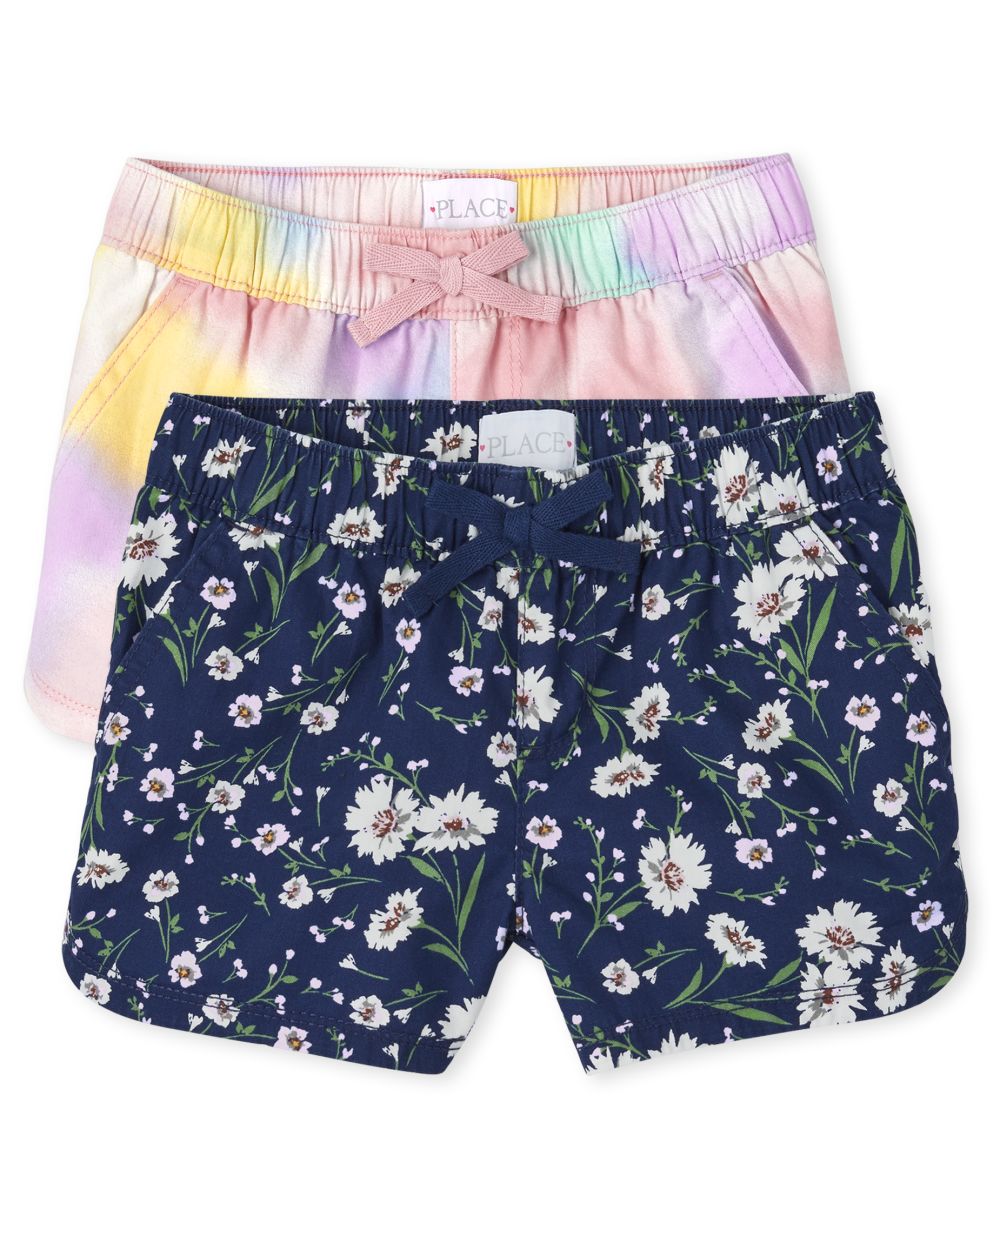 The Children's Place Girls Print Twill Pull On Shorts 2-Pack - Pink - 6X/7